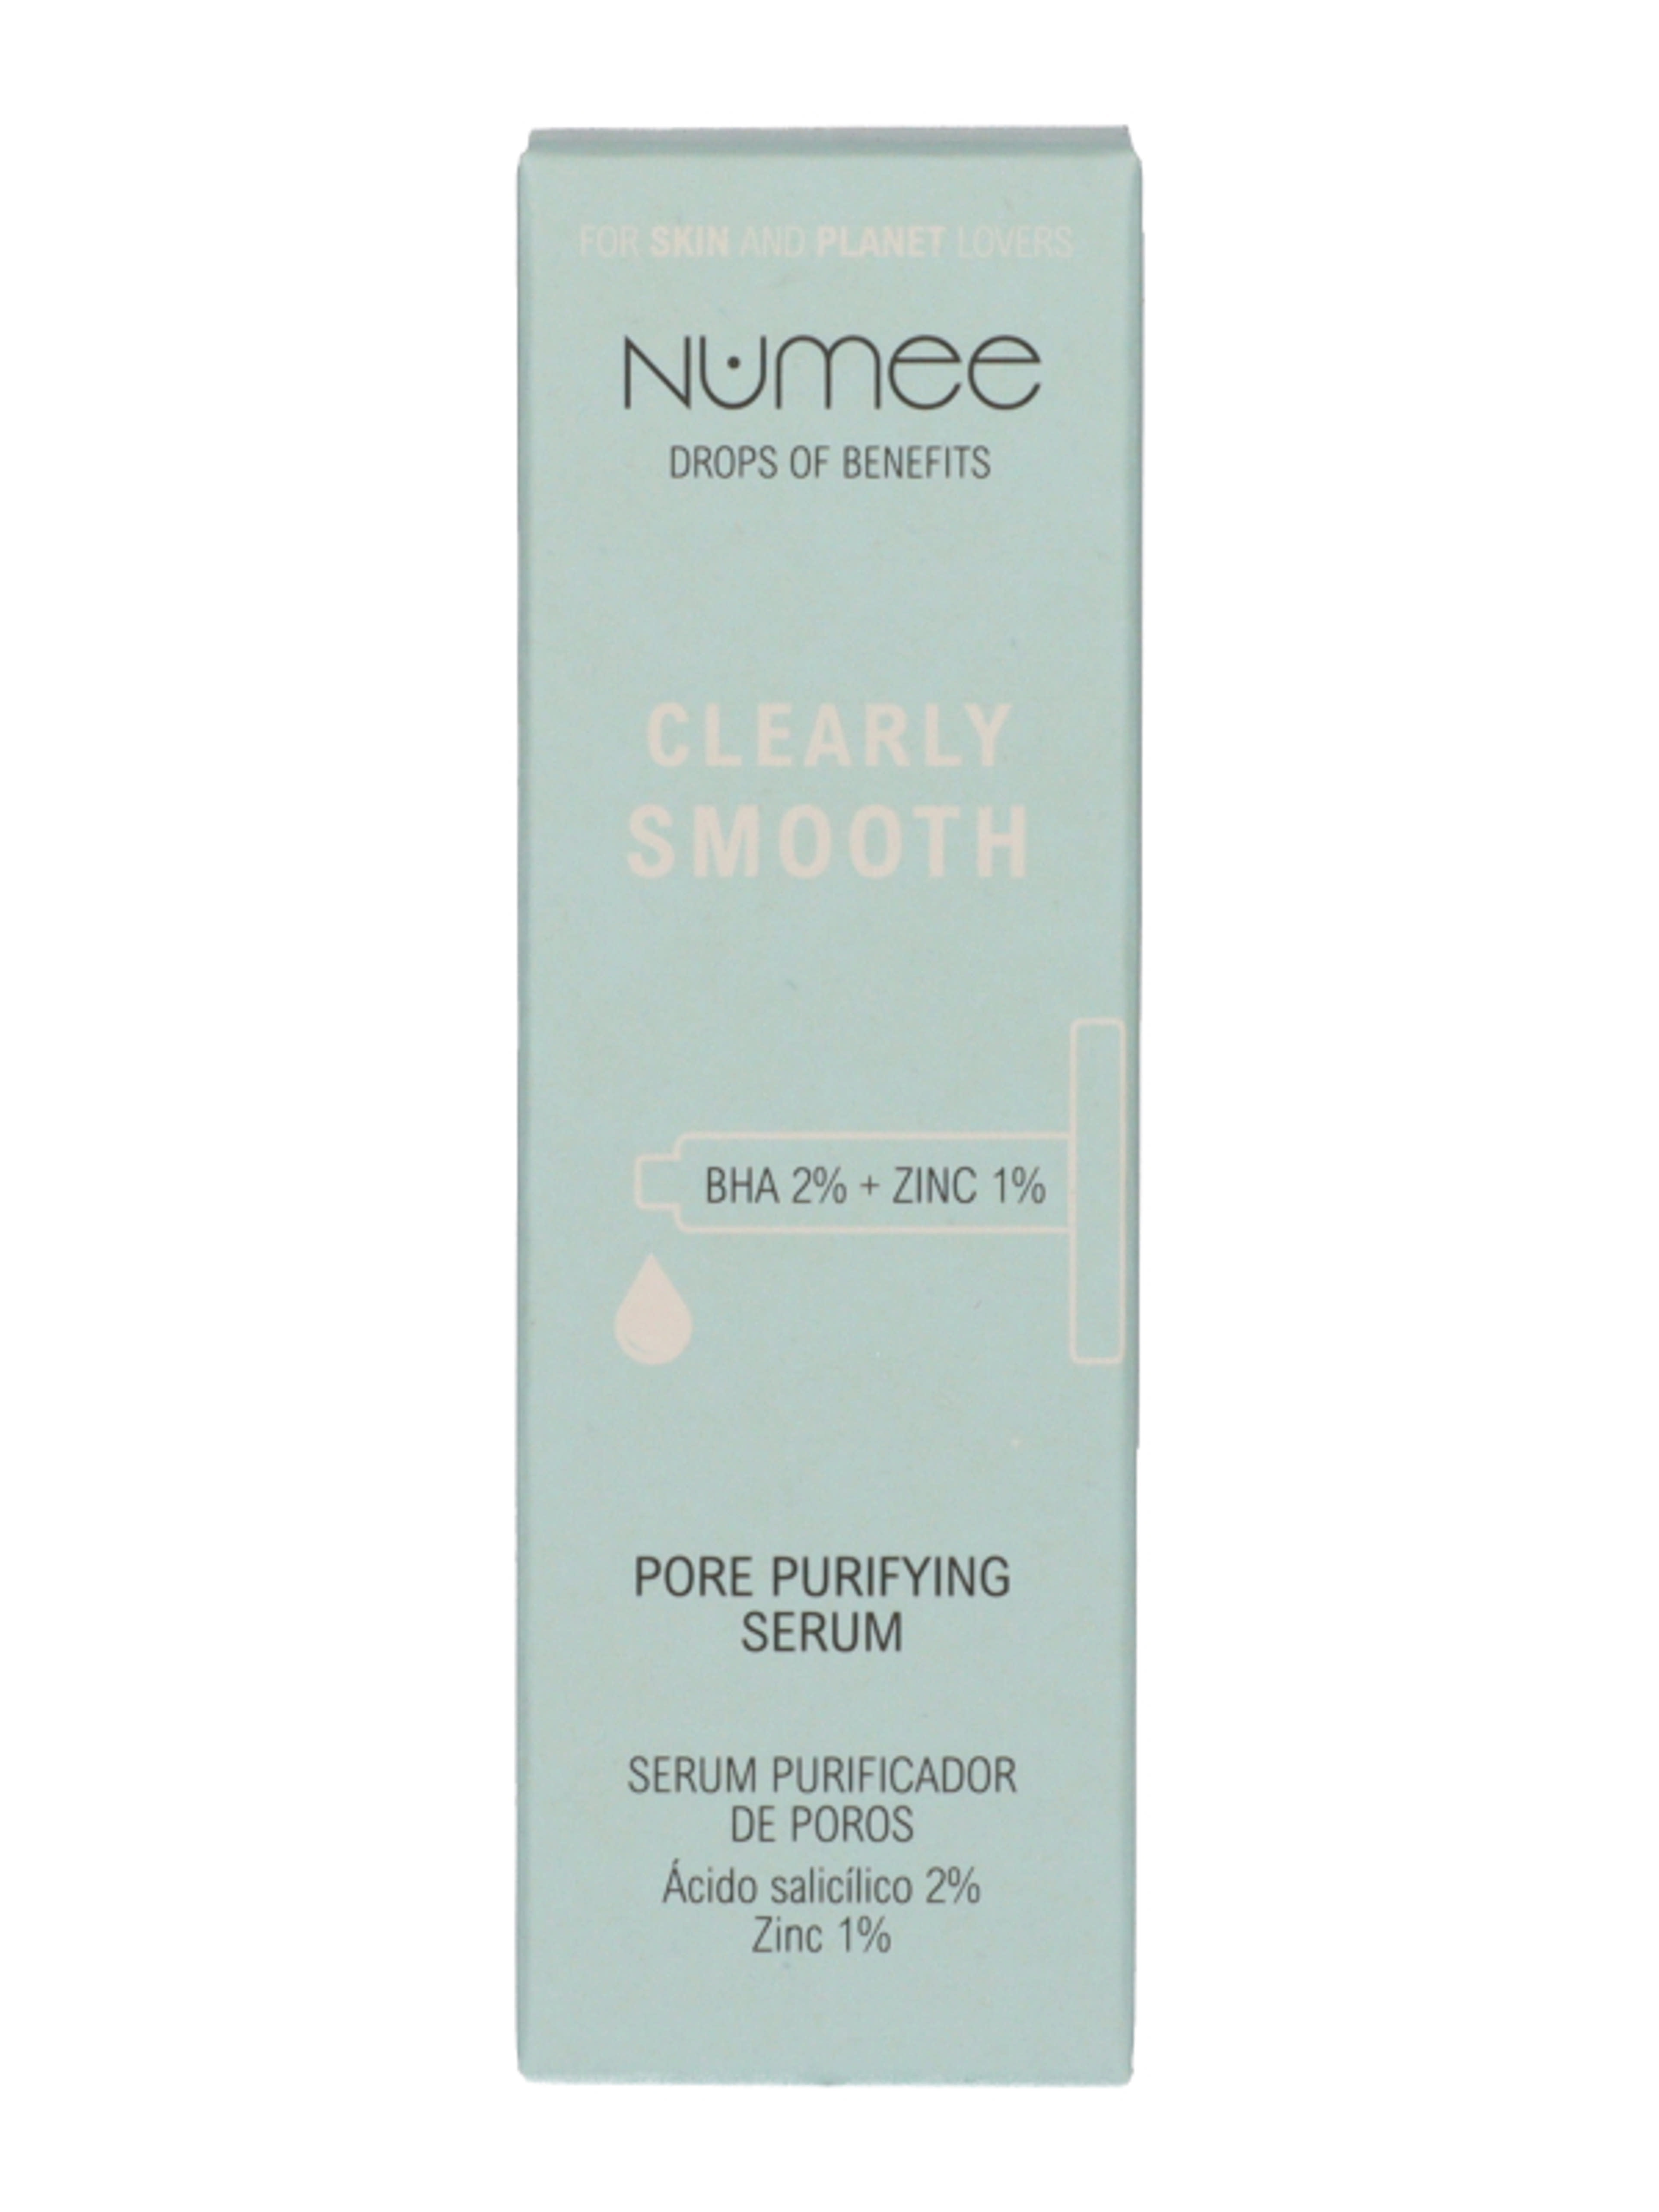 Numee Drops of Benefits Clearly Smooth Salicylic Acid szérum - 30 ml